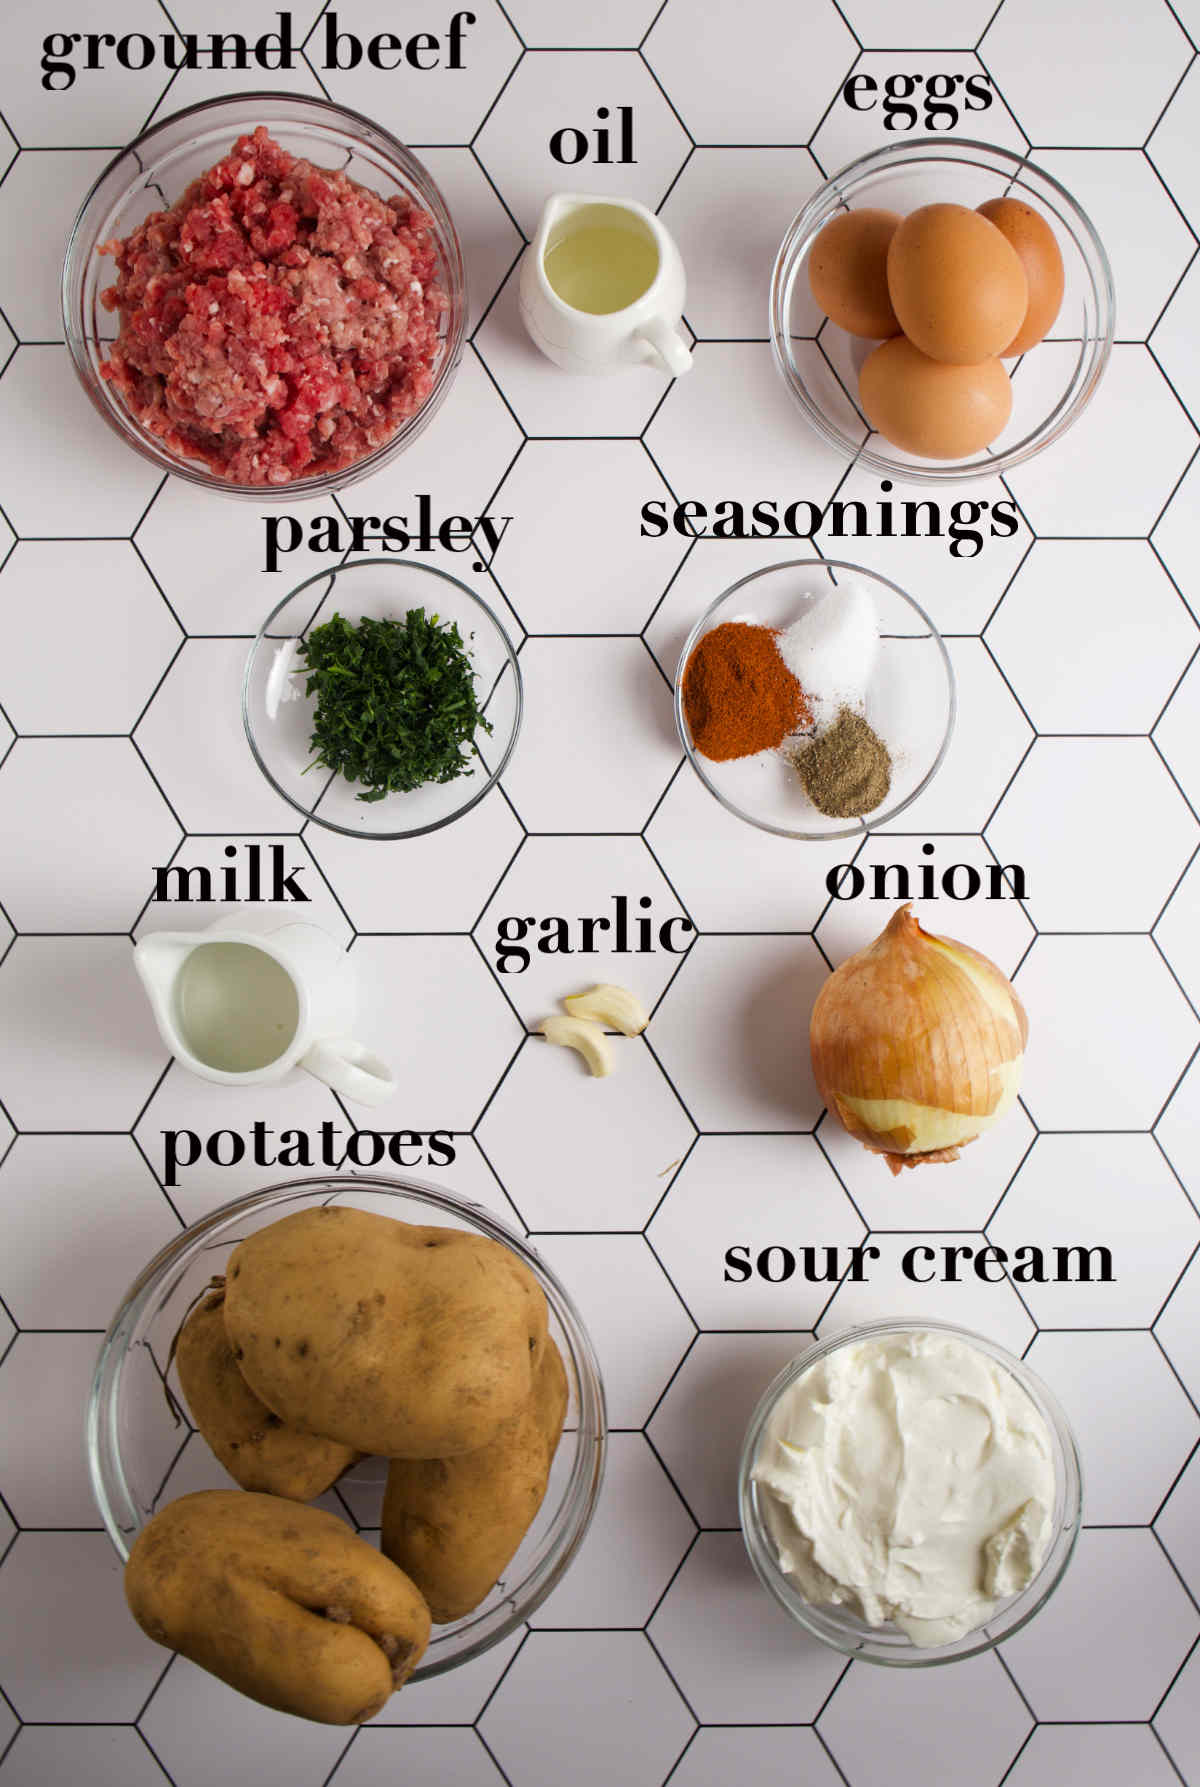 Overhead photo of ingredients to make moussaka.